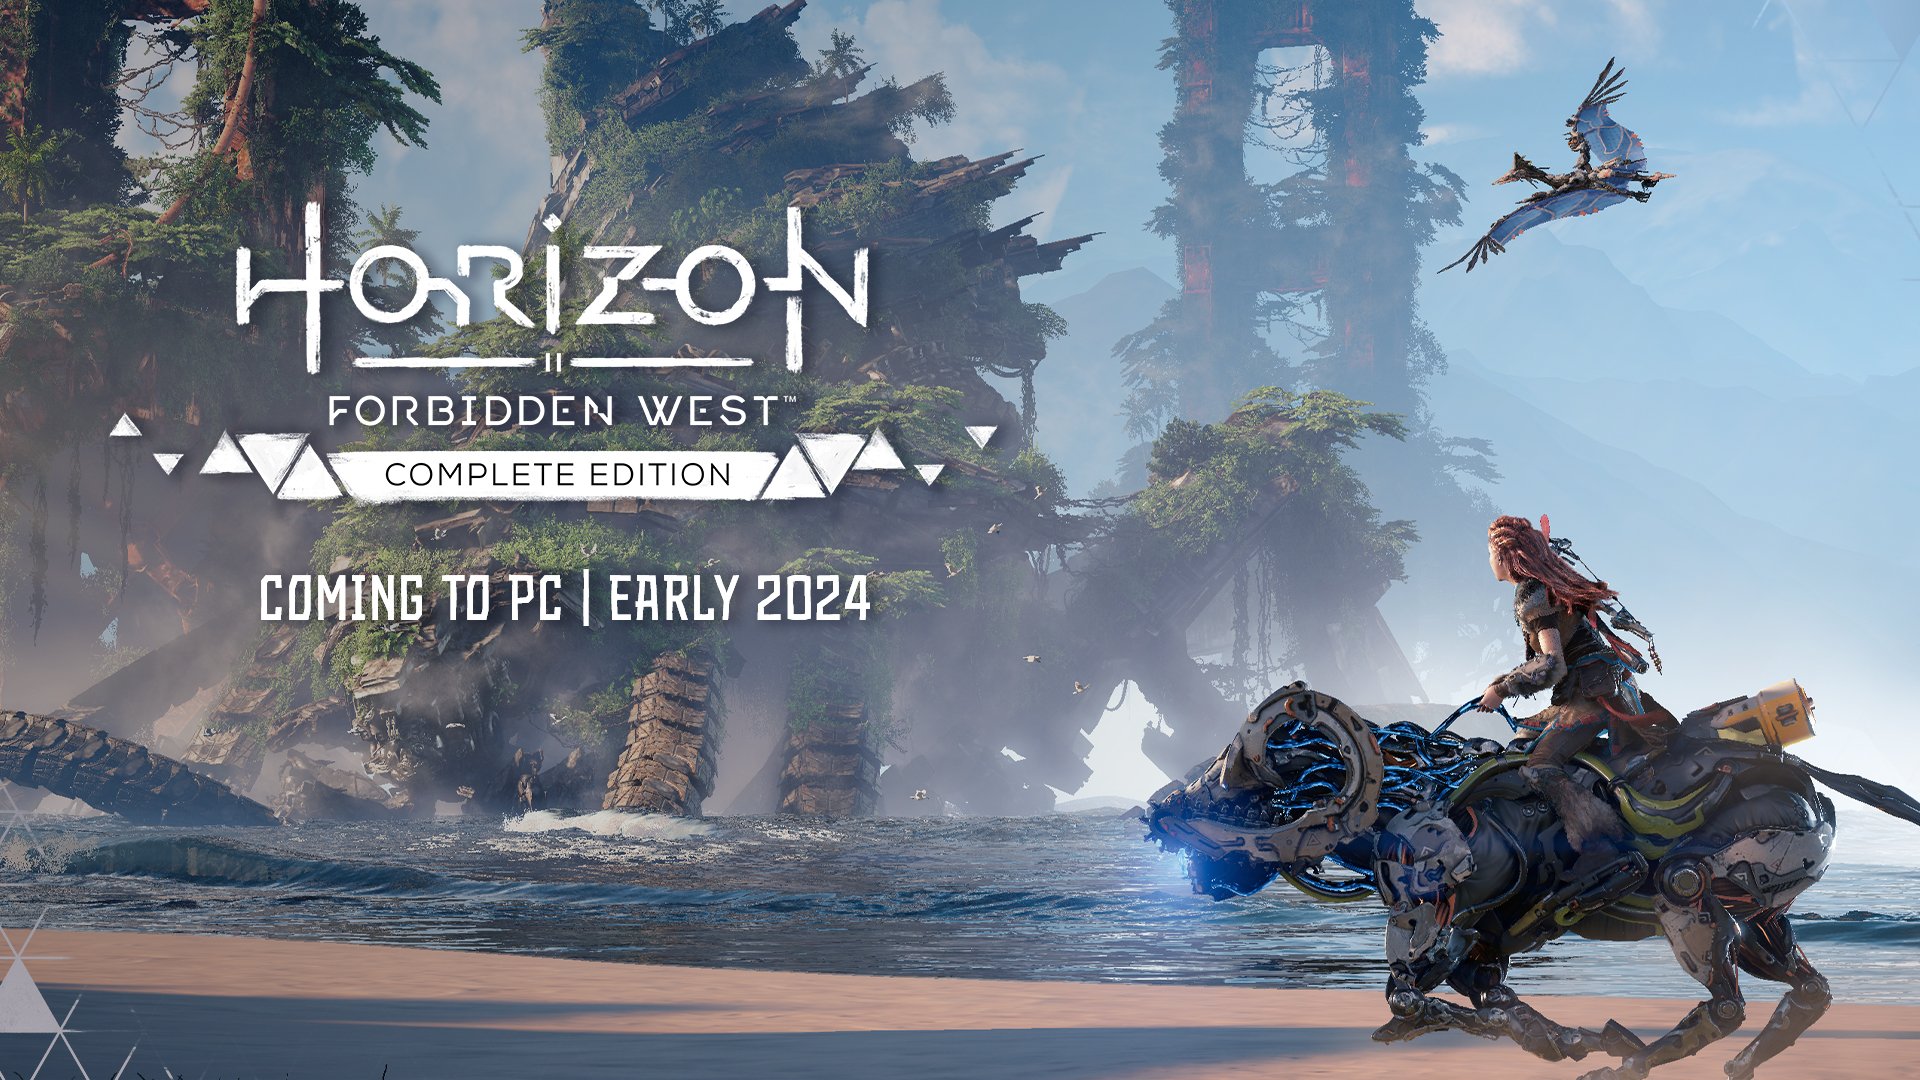 Horizon Forbidden West Complete Edition is coming to PCs in 2024 